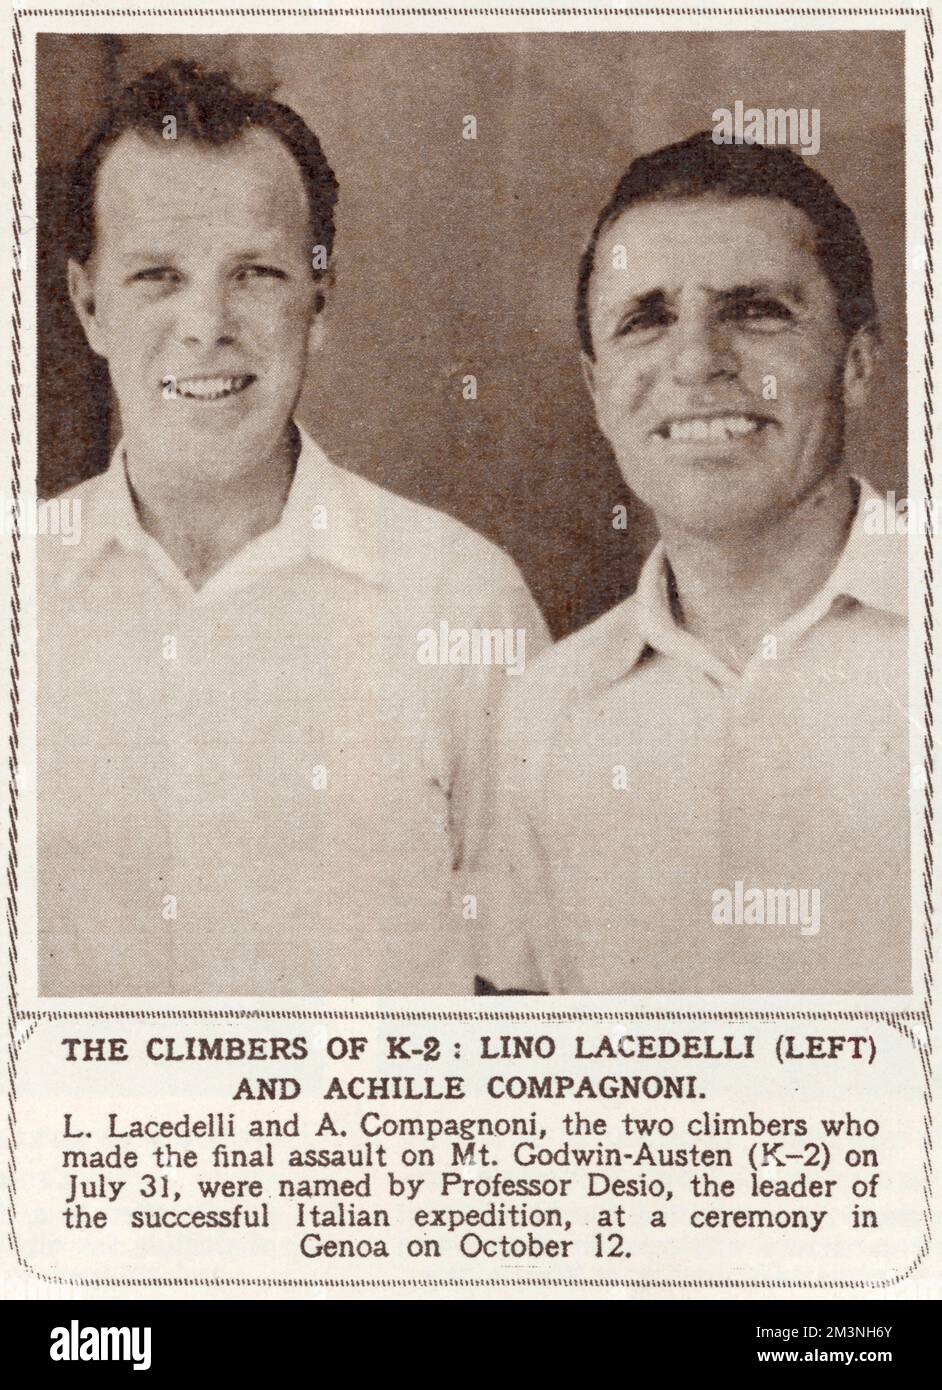 Lino Lacedelli (1925 - 2009)  on the left, alongside Achille Compagnoni (1914 - 2009), the two climbers who made the first successful ascent to the summit of K2 on 31 July 1954, part of an Italian expedition led by Count Ardito Desio. K2 is the second highest mountain in the world, and the summit was not reached for a second time until 1977.     Date: October 1954 Stock Photo